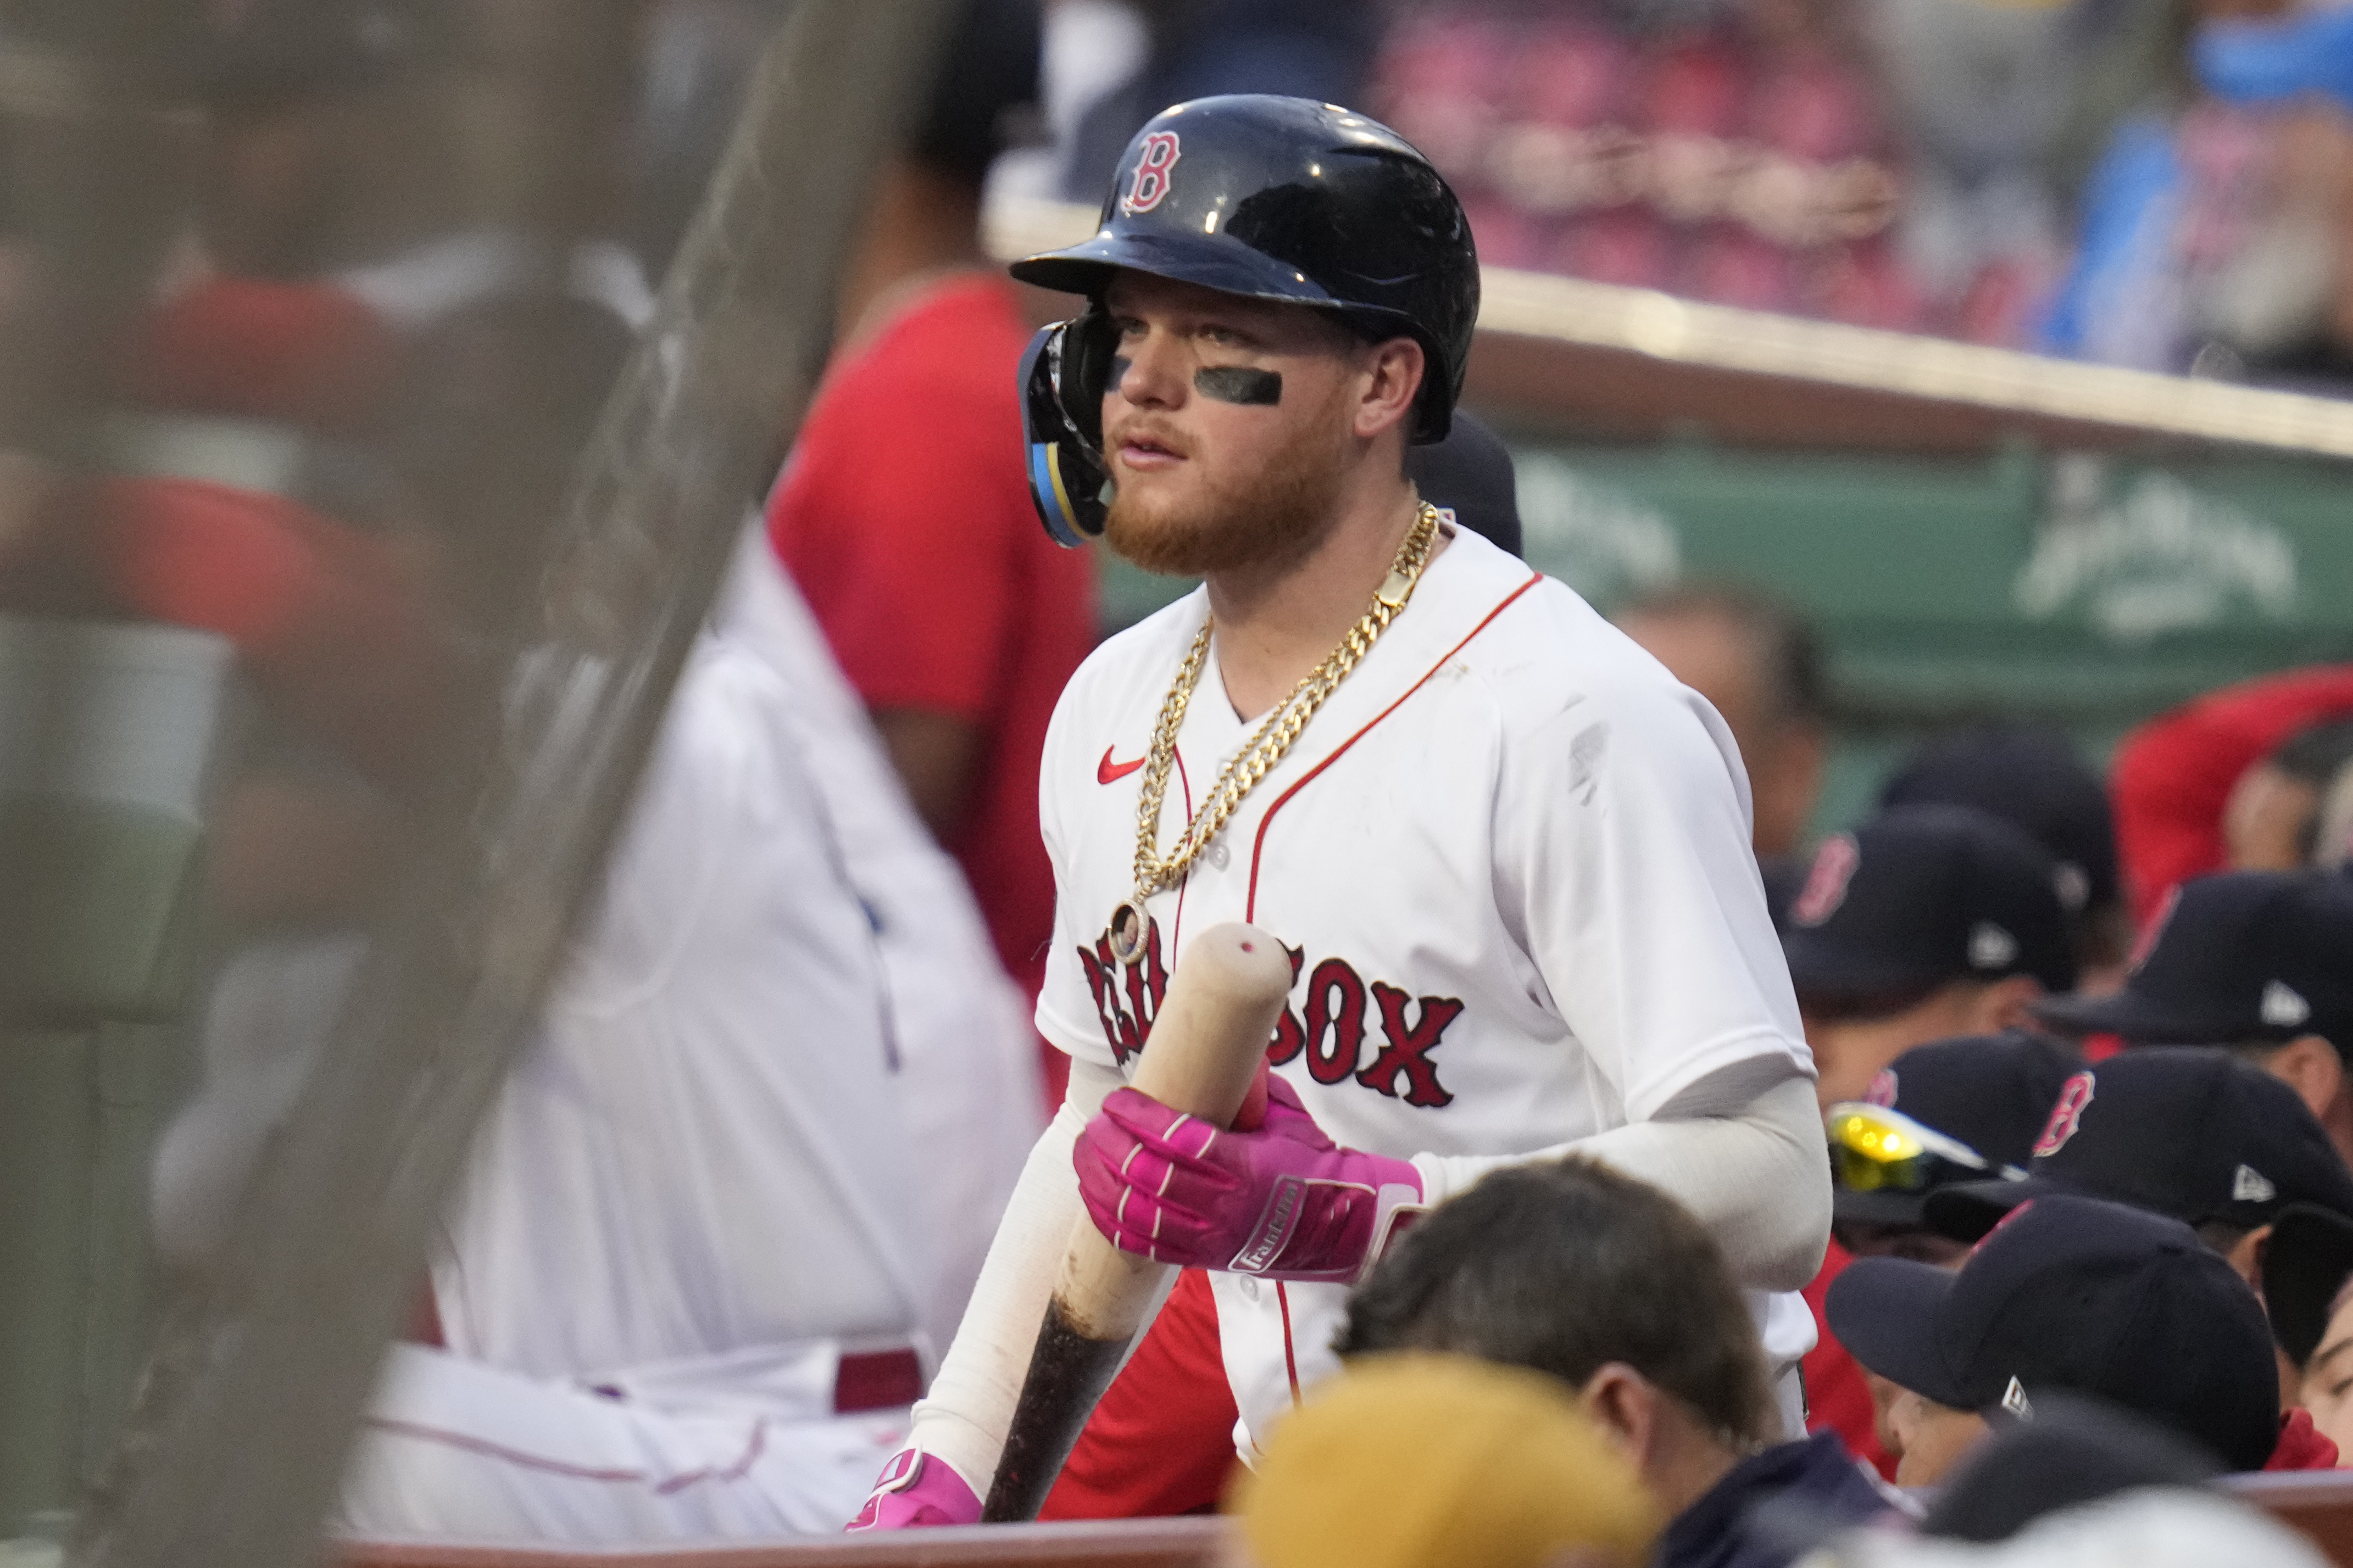 More refreshed' Alex Verdugo back in Red Sox lineup after taking